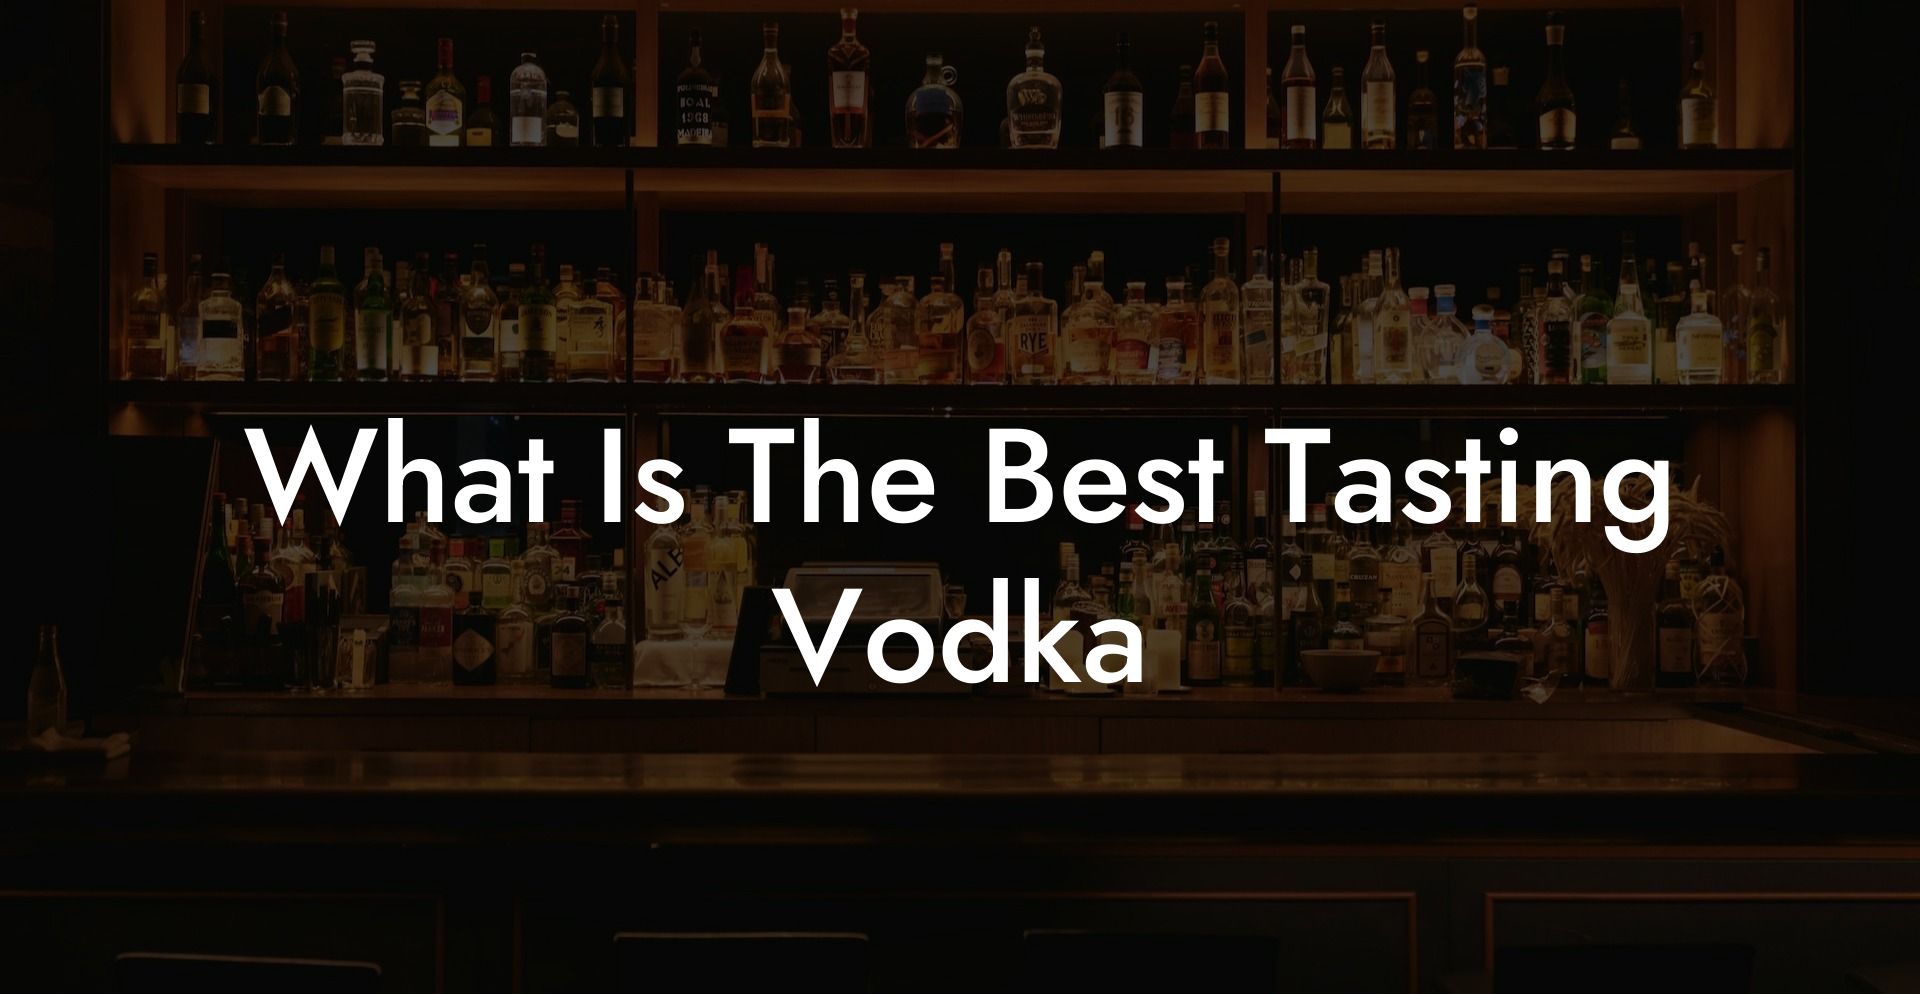 What Is The Best Tasting Vodka